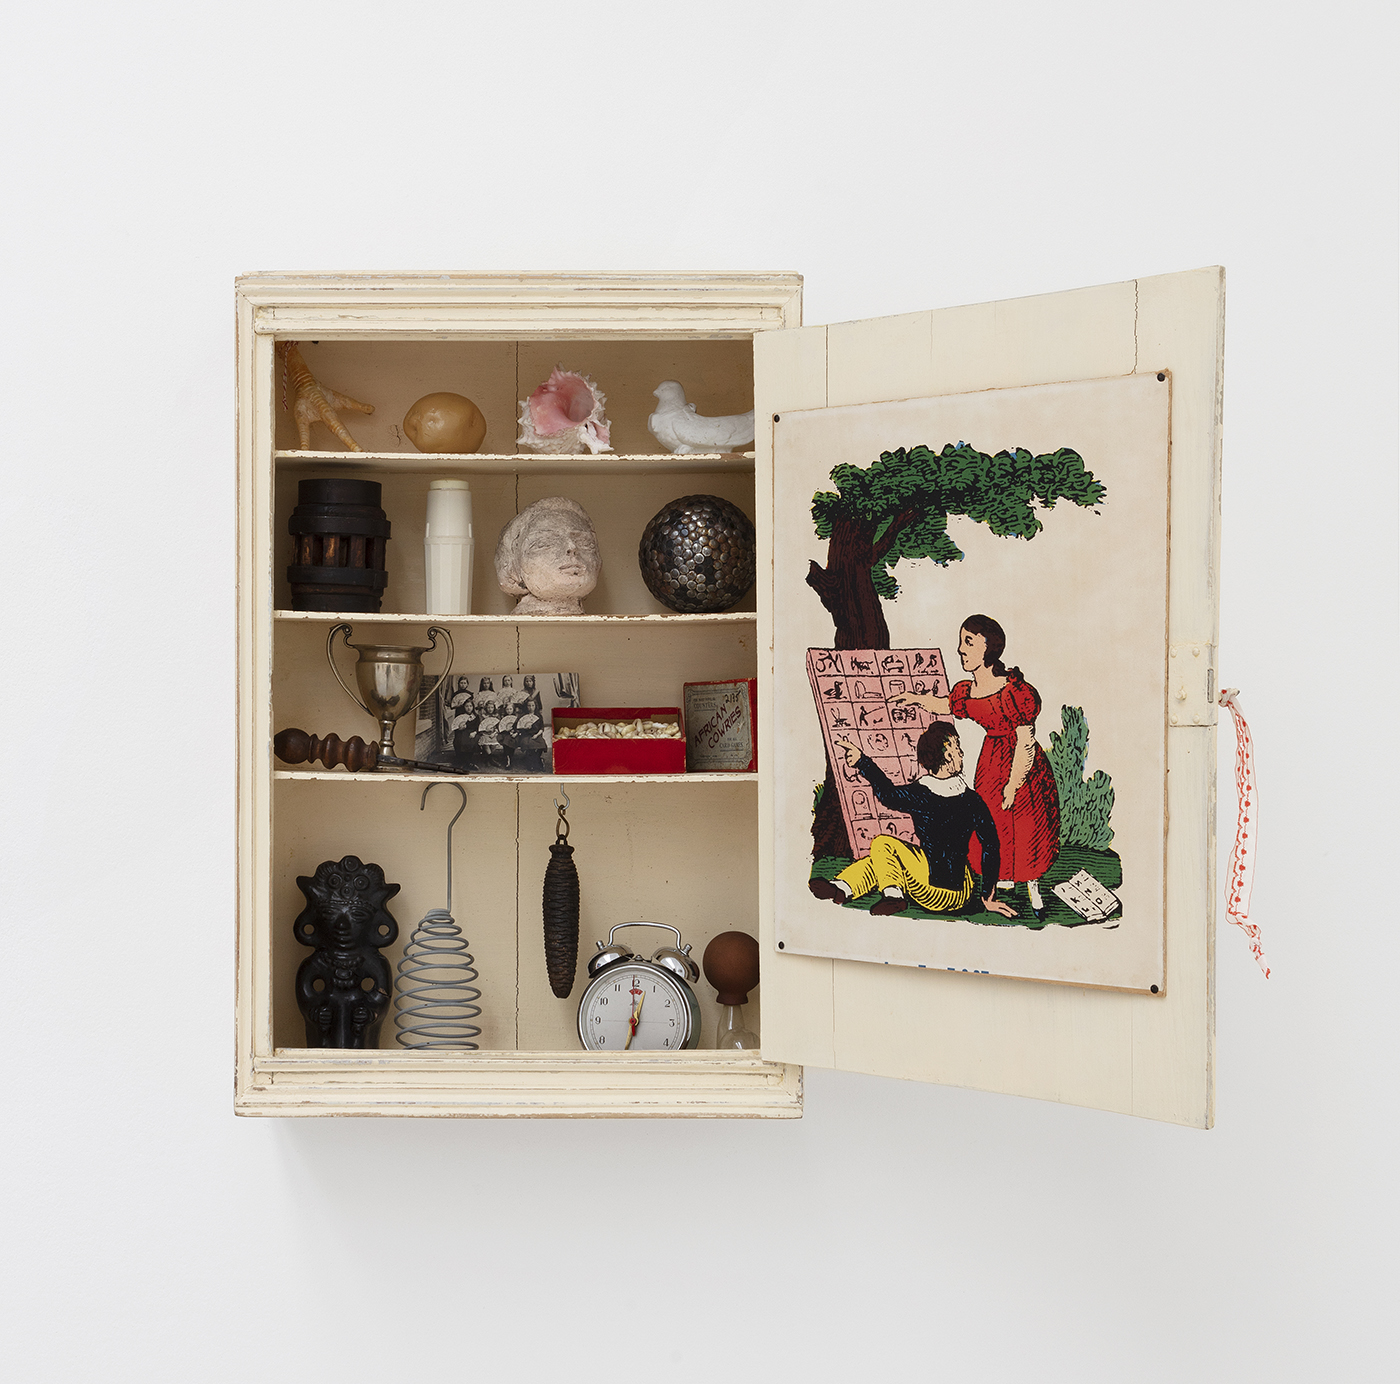 Mark Dion - The Medecine Cabinet of Mystery, 2013-2019